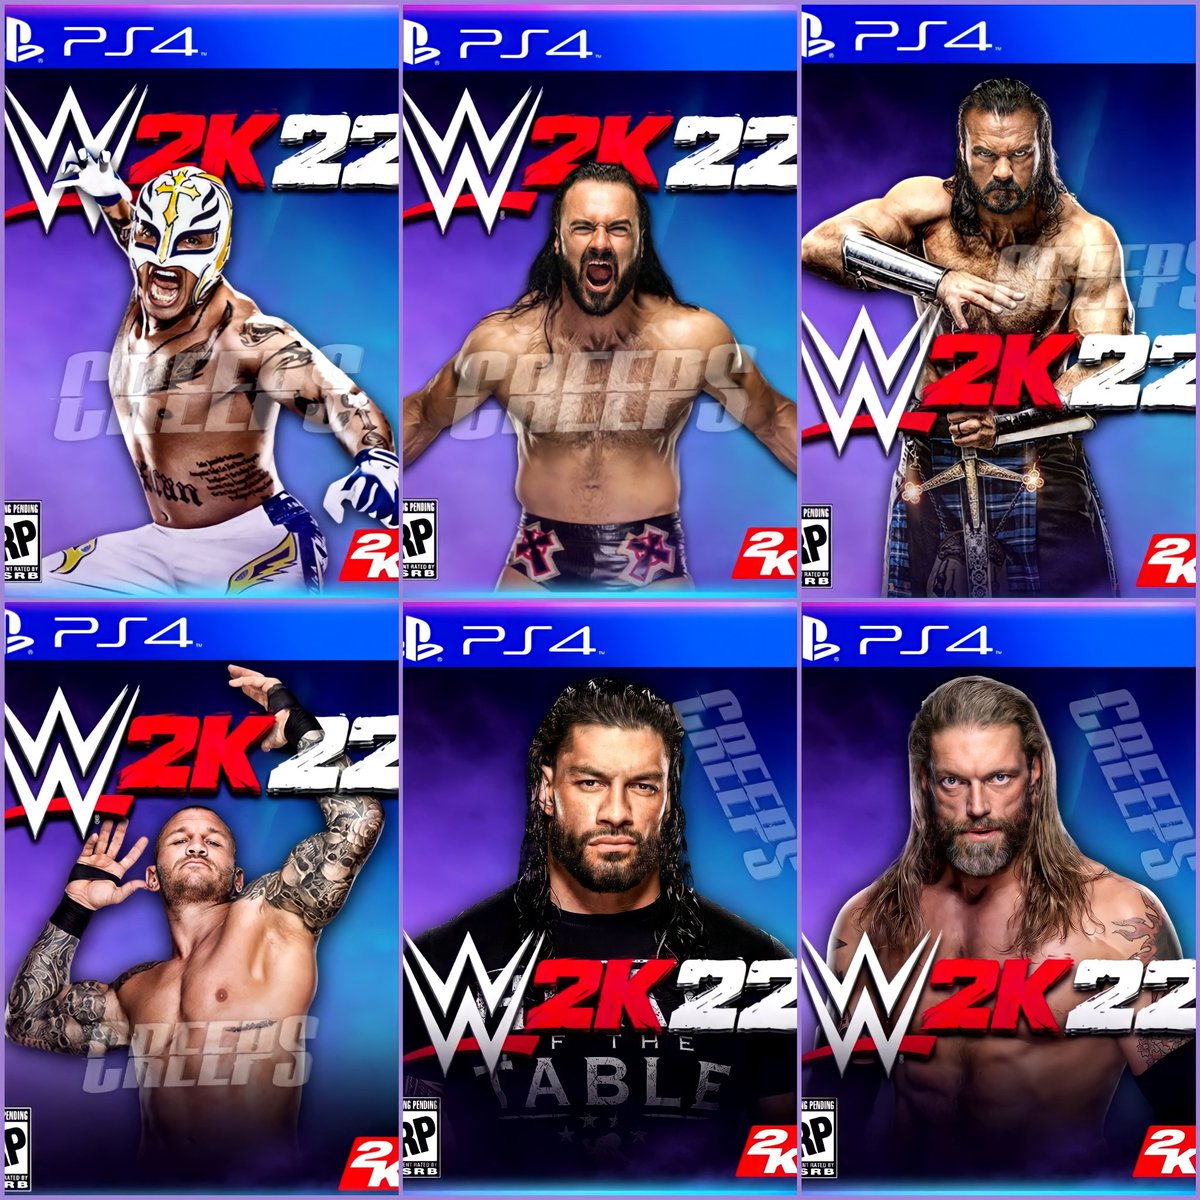 تويتر Creeps على تويتر All Of My Wwe2k22 Covers Let Me Know Which One Is Your Favourite And Tell Me Who You Want To See Make The Cover Of This Year S